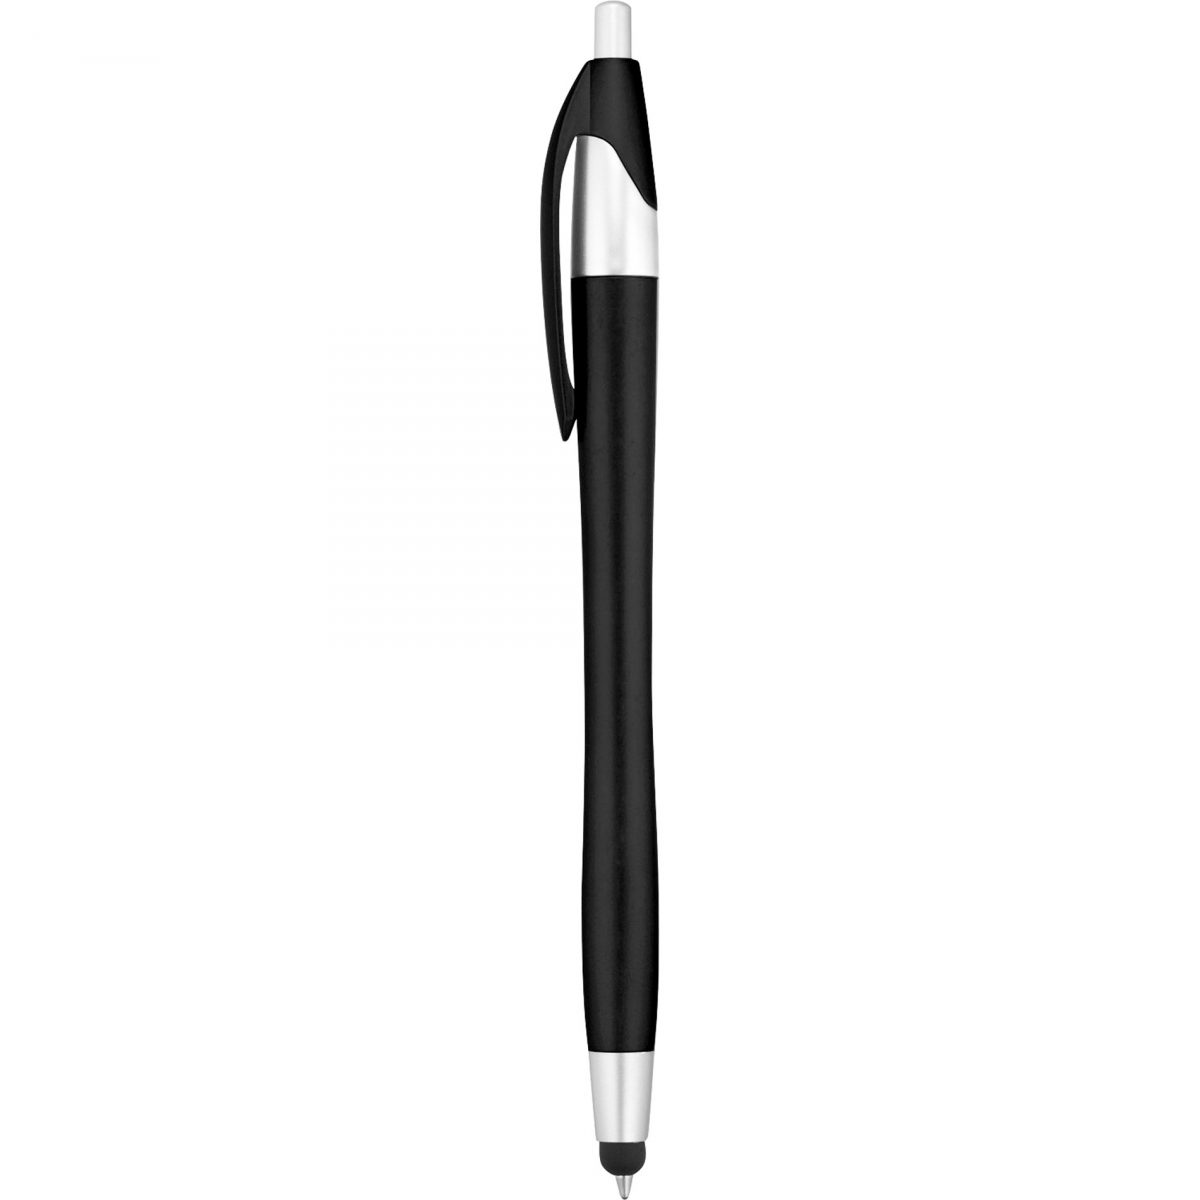 The Cougar Pen-Stylus – Glamour